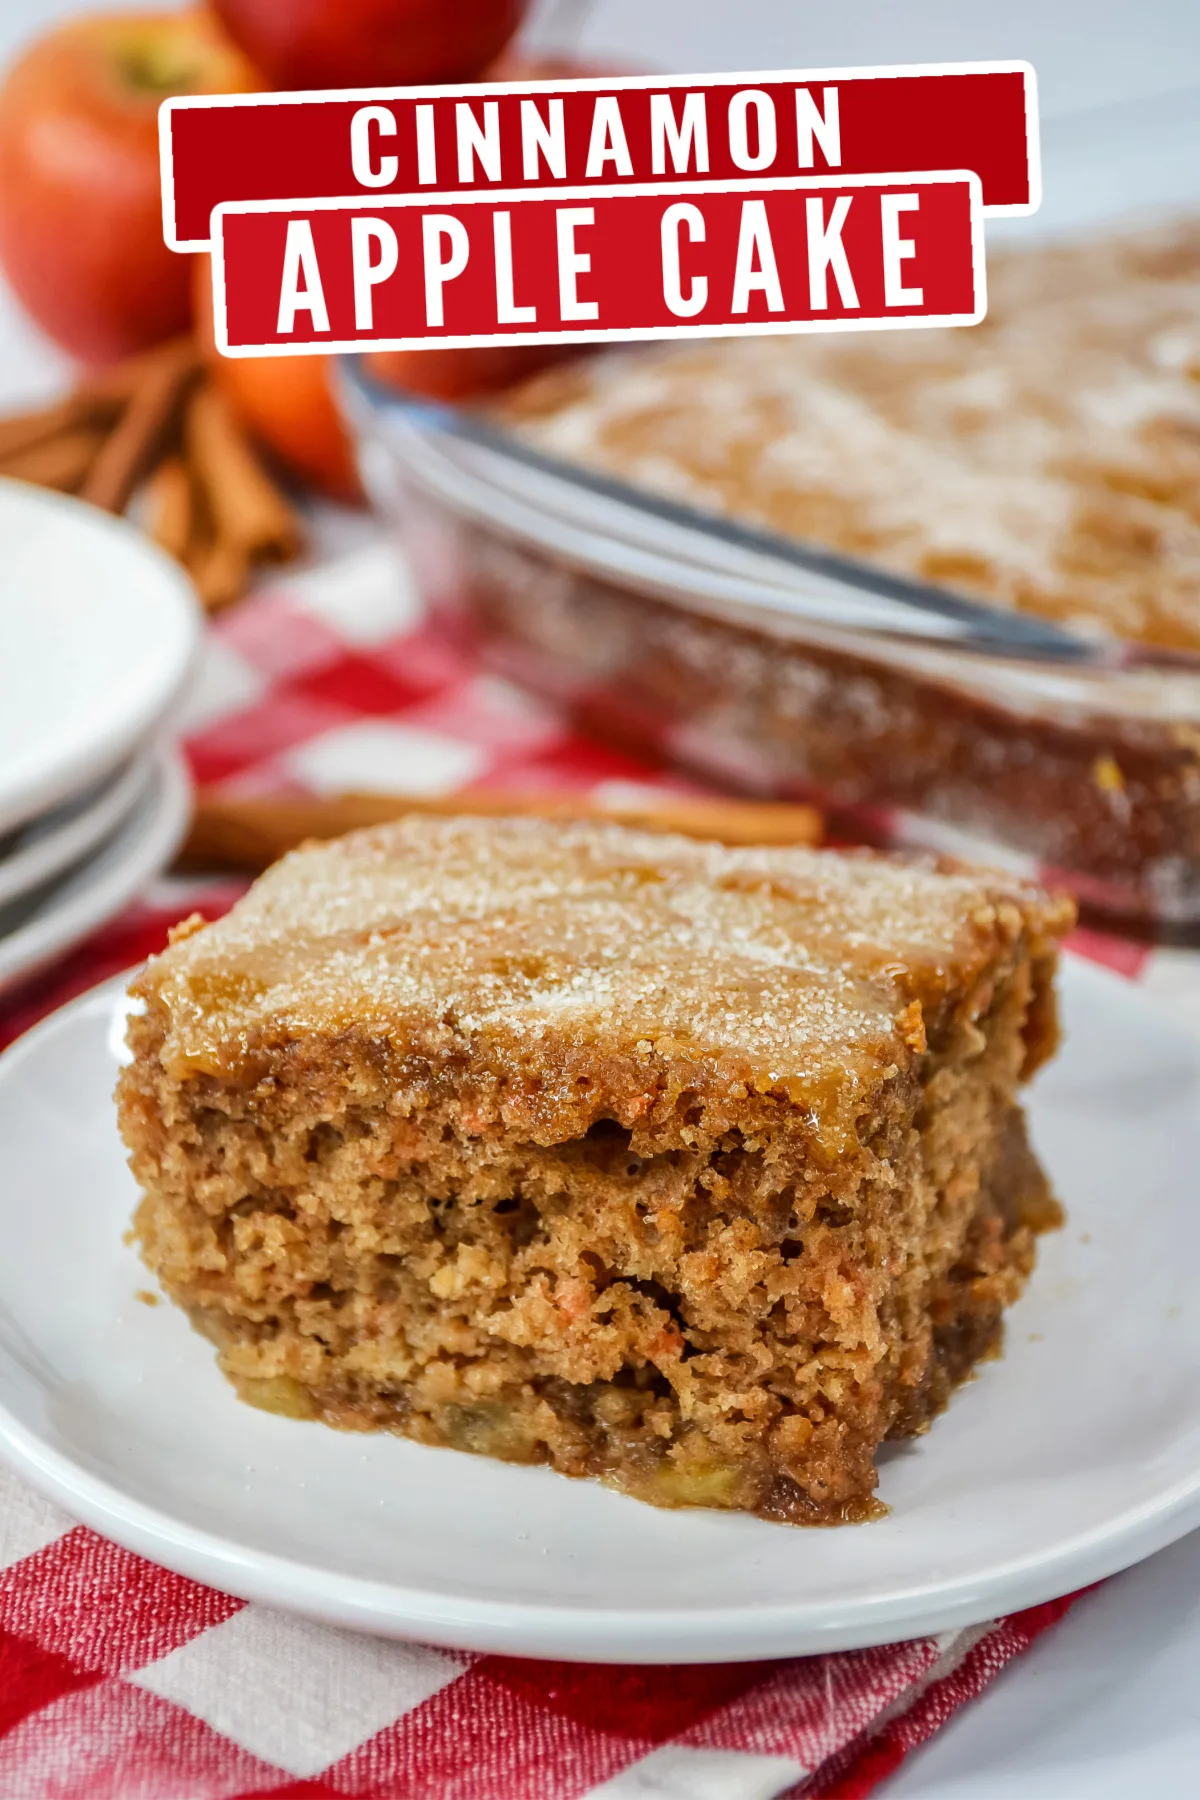 This cinnamon apple cake recipe is sure to become a family favorite! It's loaded with apples and topped off with a sweet sugar crust.